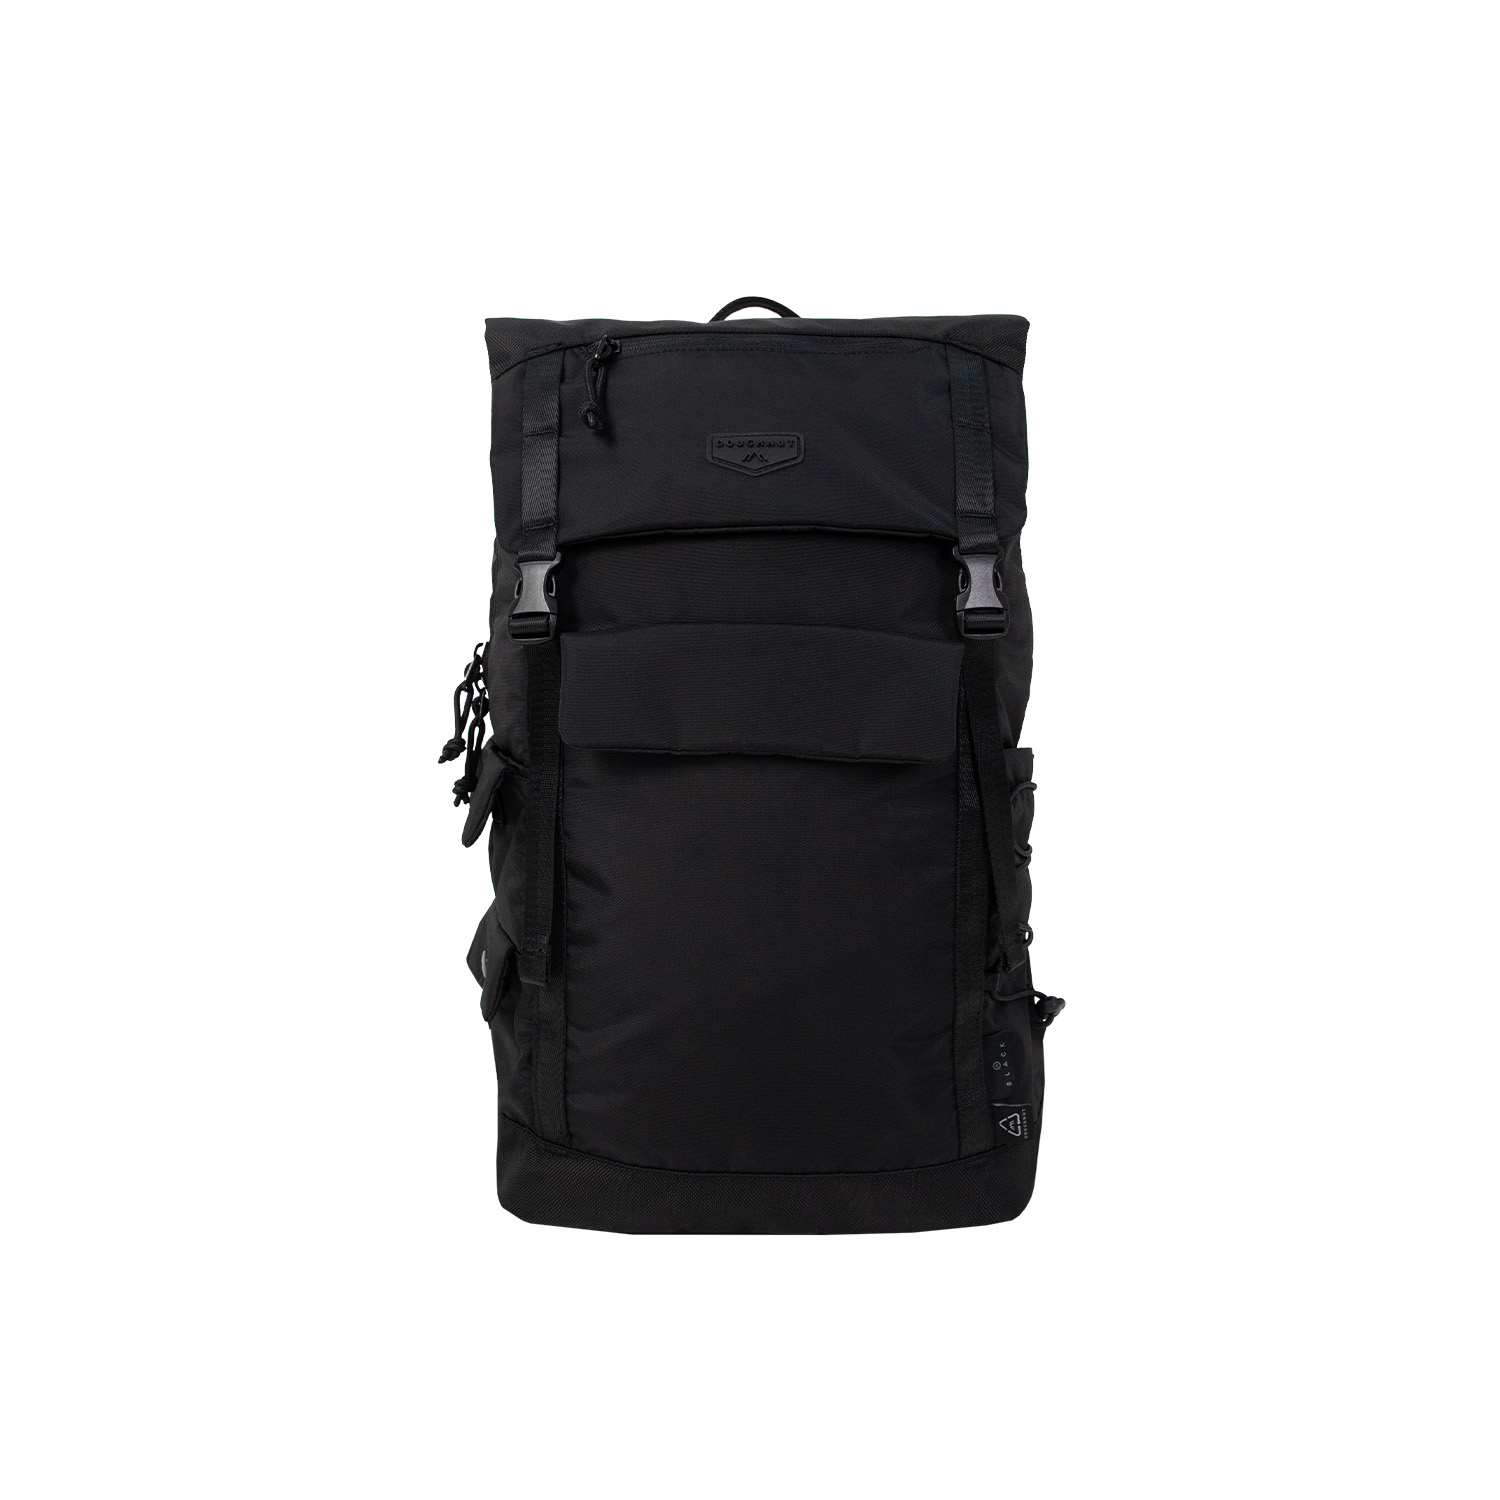 The Actualise Series in Lucid is an all-black utilitarian backpack